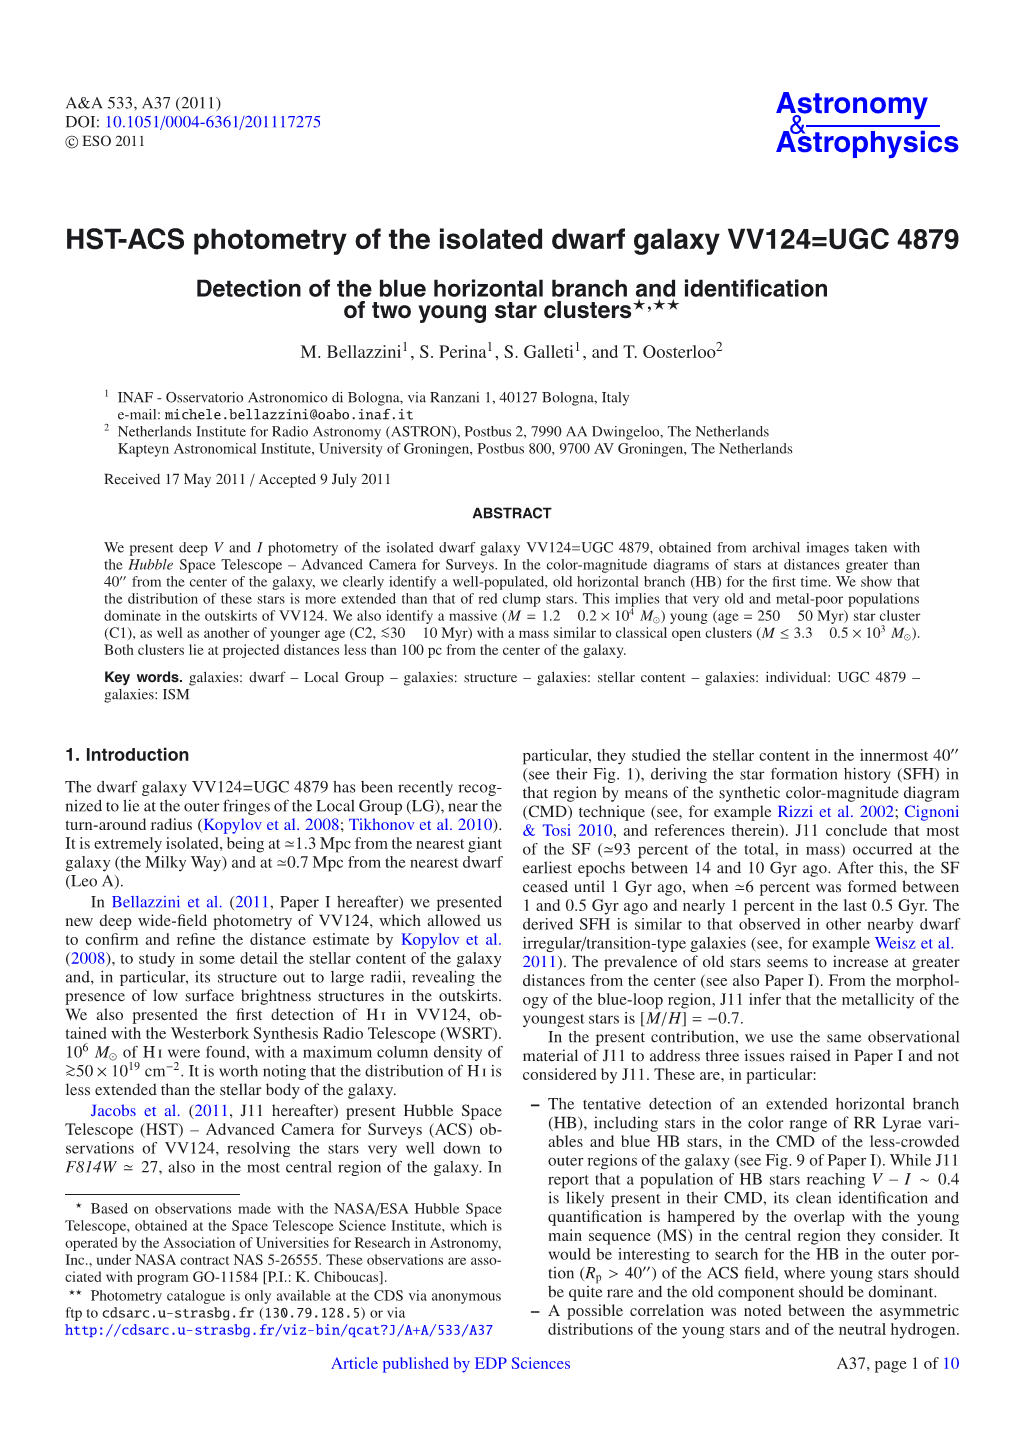 HST-ACS Photometry of the Isolated Dwarf Galaxy VV124=UGC 4879